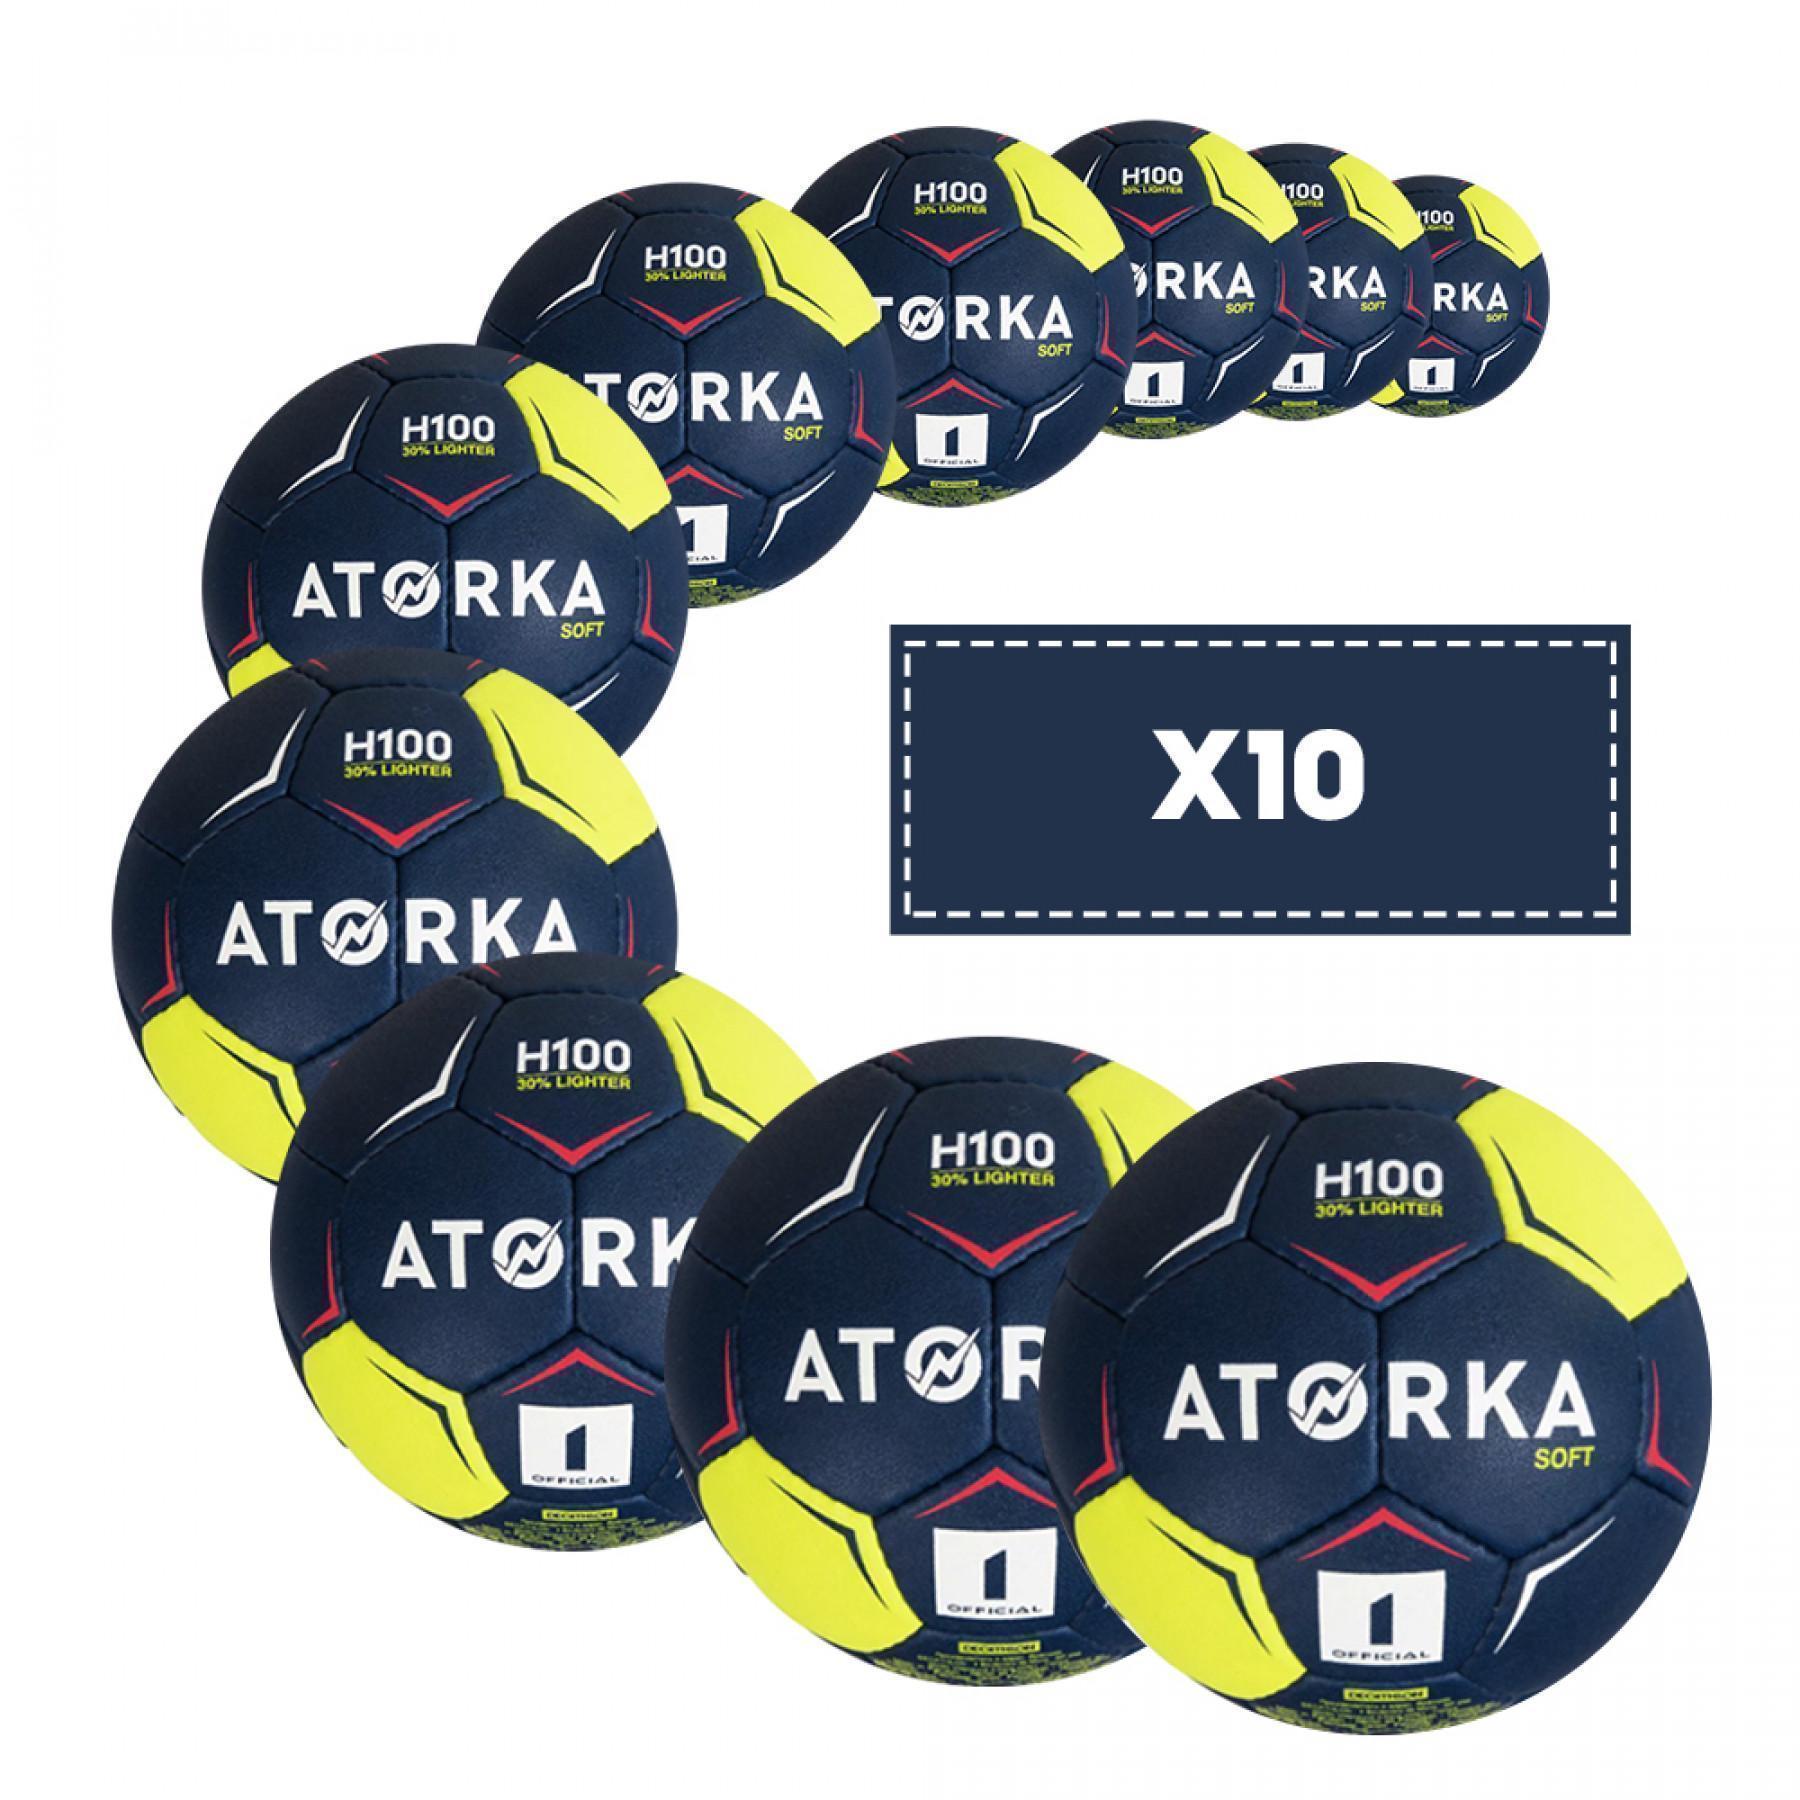 Pack of 10 children's balloons Atorka H100 Soft - Taille 1